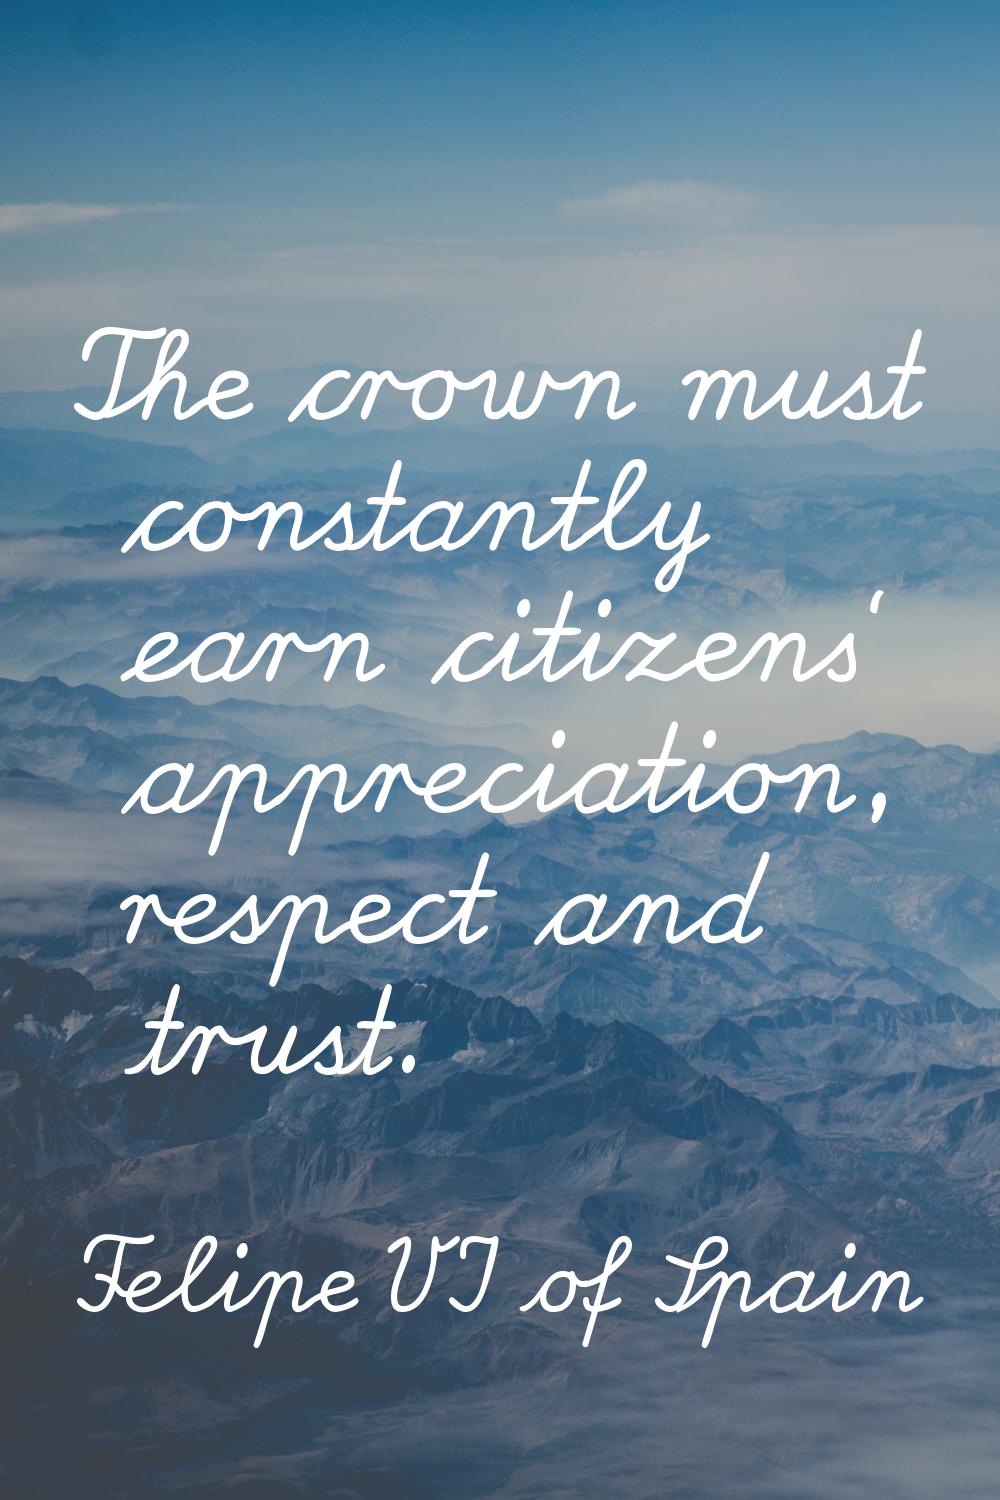 The crown must constantly earn citizens' appreciation, respect and trust.